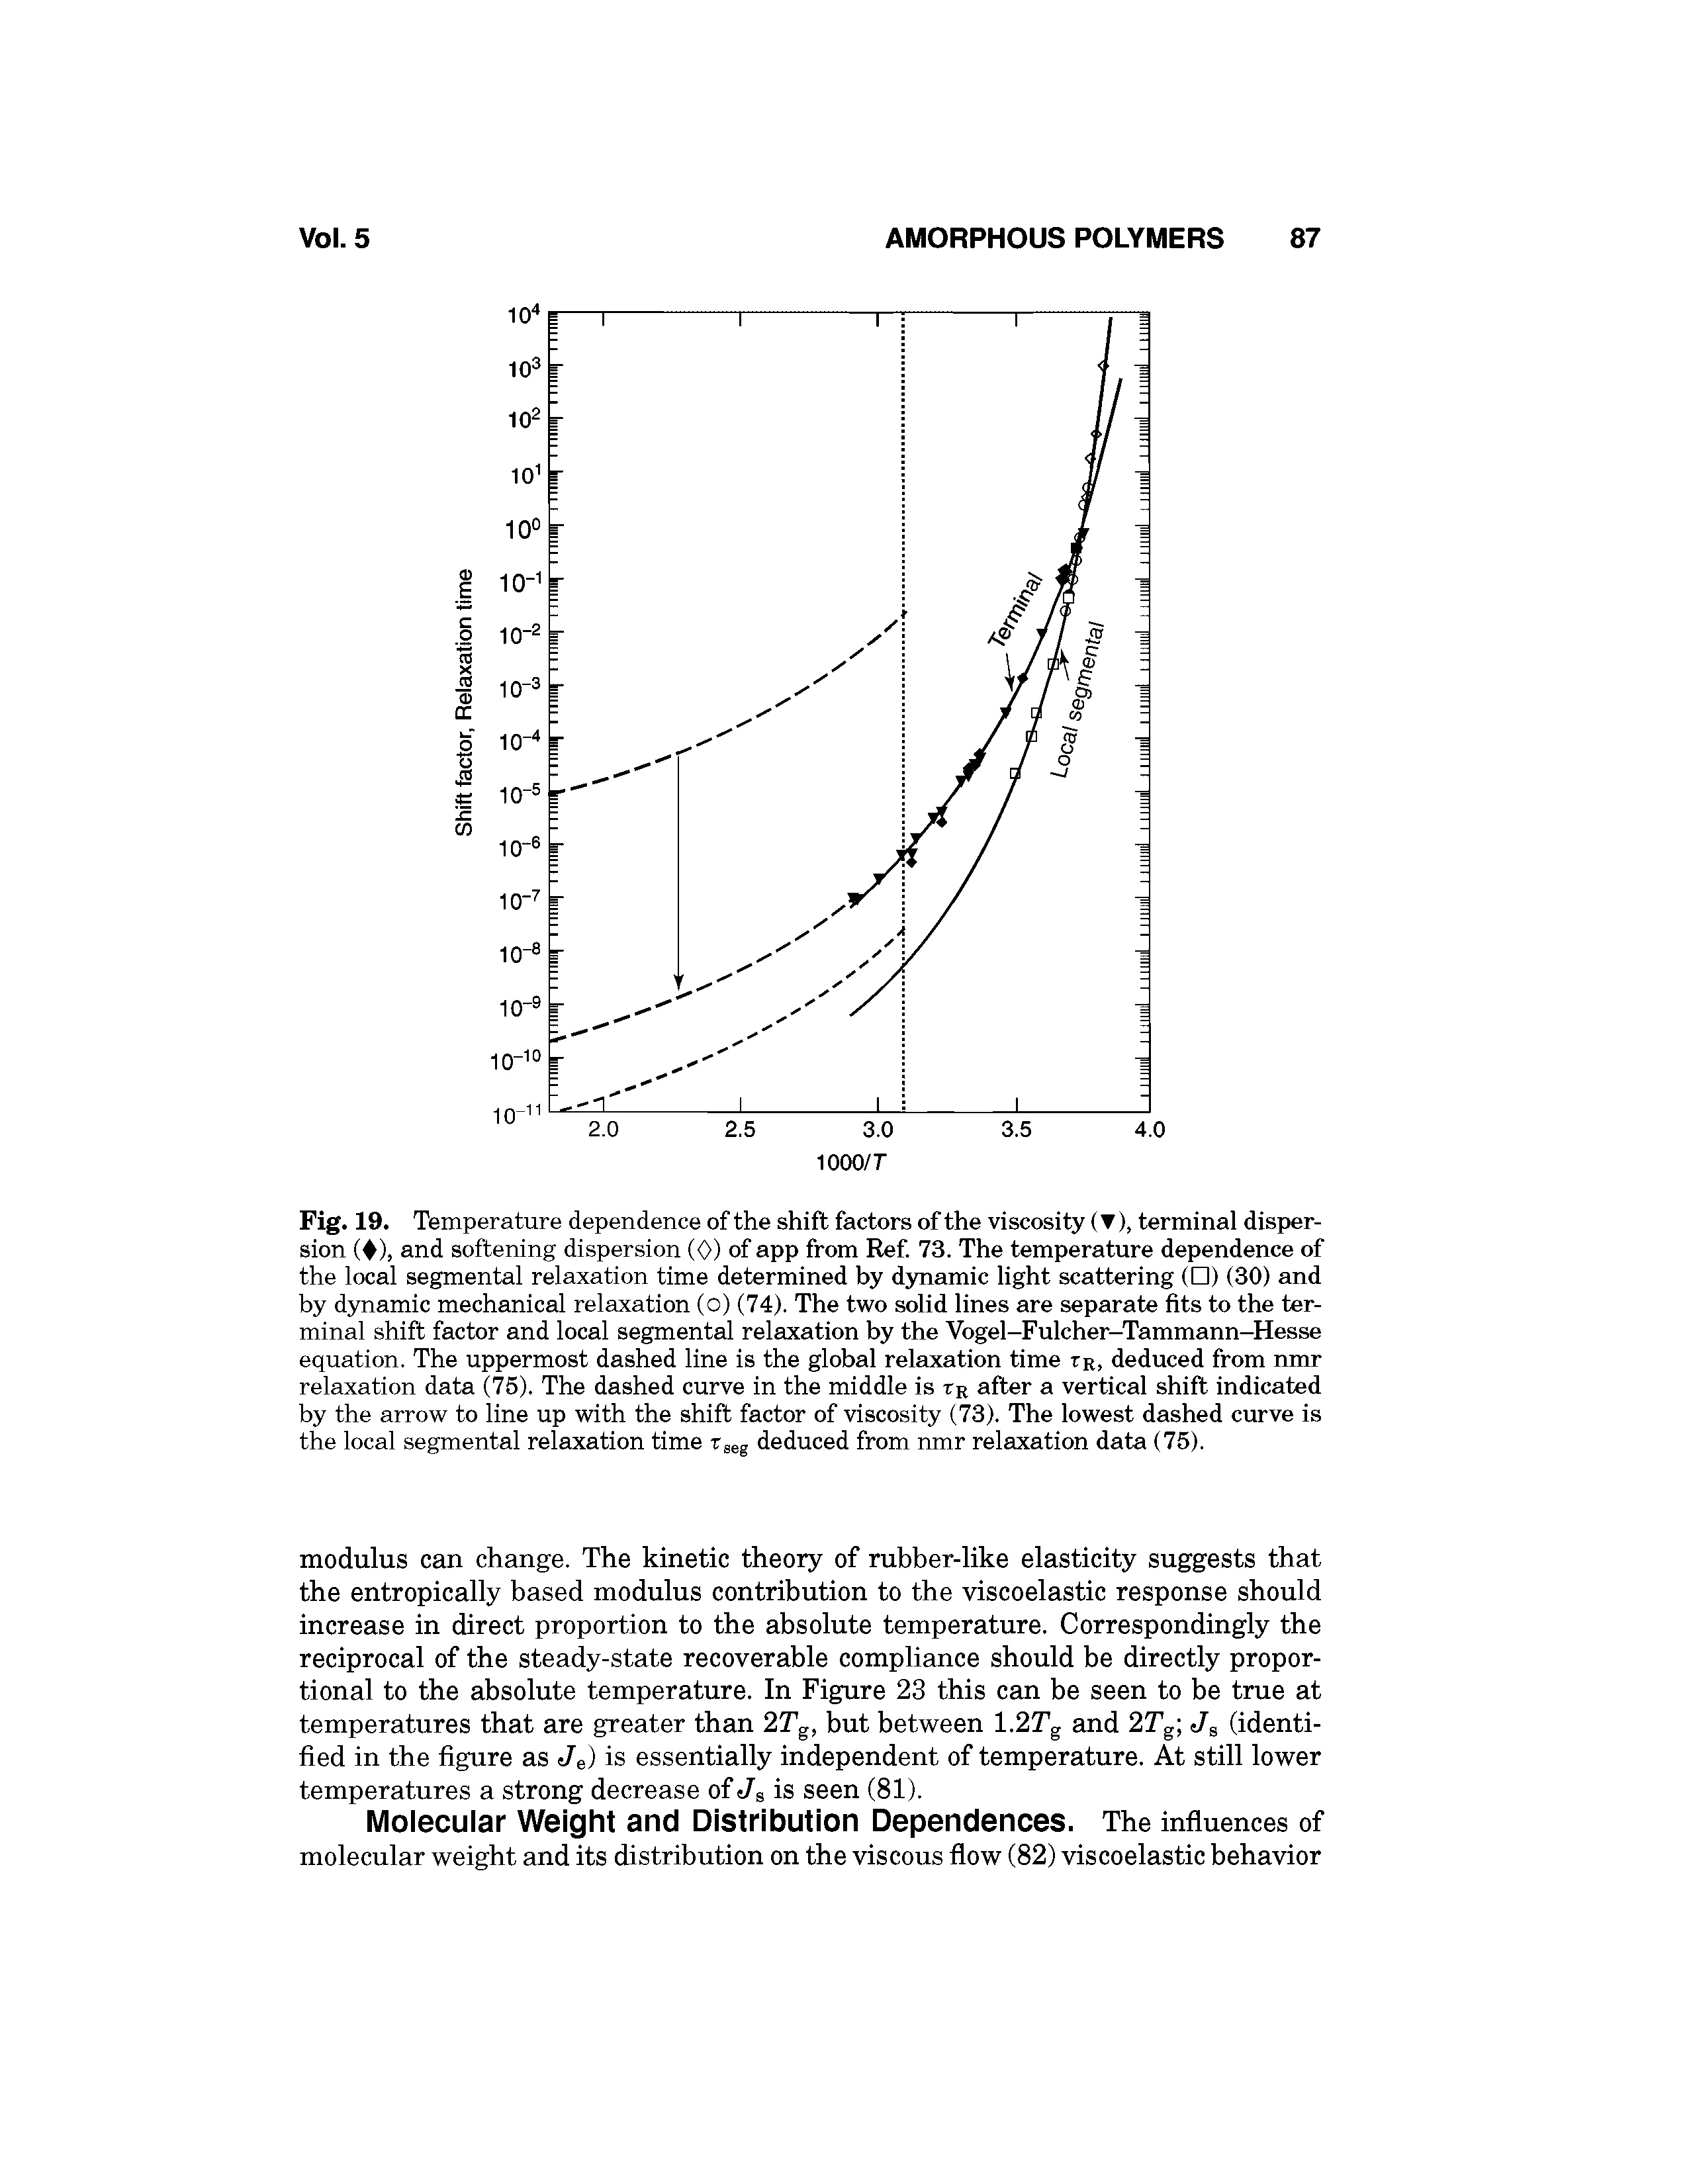 Fig. 19. Temperature dependence of the shift factors of the viscosity (T), terminal dispersion ( ), and softening dispersion (0) of app from Ref. 73. The temperature dependence of the local segmental relaxation time determined by dynamic light scattering ( ) (30) and by dynamic mechanical relaxation (o) (74). The two solid lines are separate fits to the terminal shift factor and local segmental relaxation by the Vogel-Fulcher-Tammann-Hesse equation. The uppermost dashed line is the global relaxation time tr, deduced from nmr relaxation data (75). The dashed curve in the middle is tr after a vertical shift indicated by the arrow to line up with the shift factor of viscosity (73). The lowest dashed curve is the local segmental relaxation time tgeg deduced from nmr relaxation data (75).